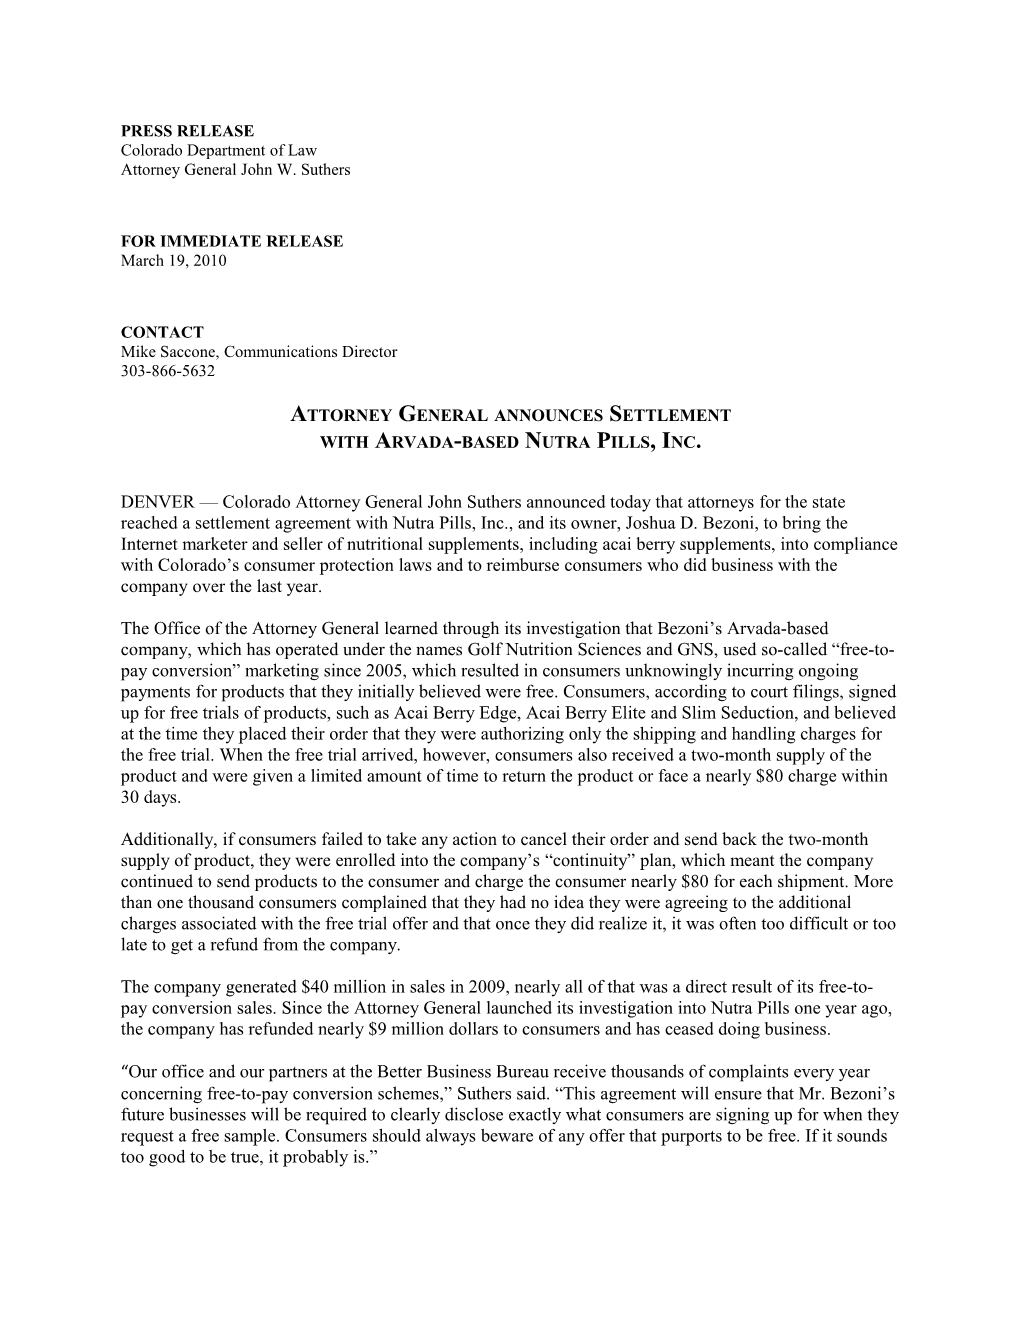 PRESS RELEASE Colorado Department of Law Attorney General John W. Suthers s1